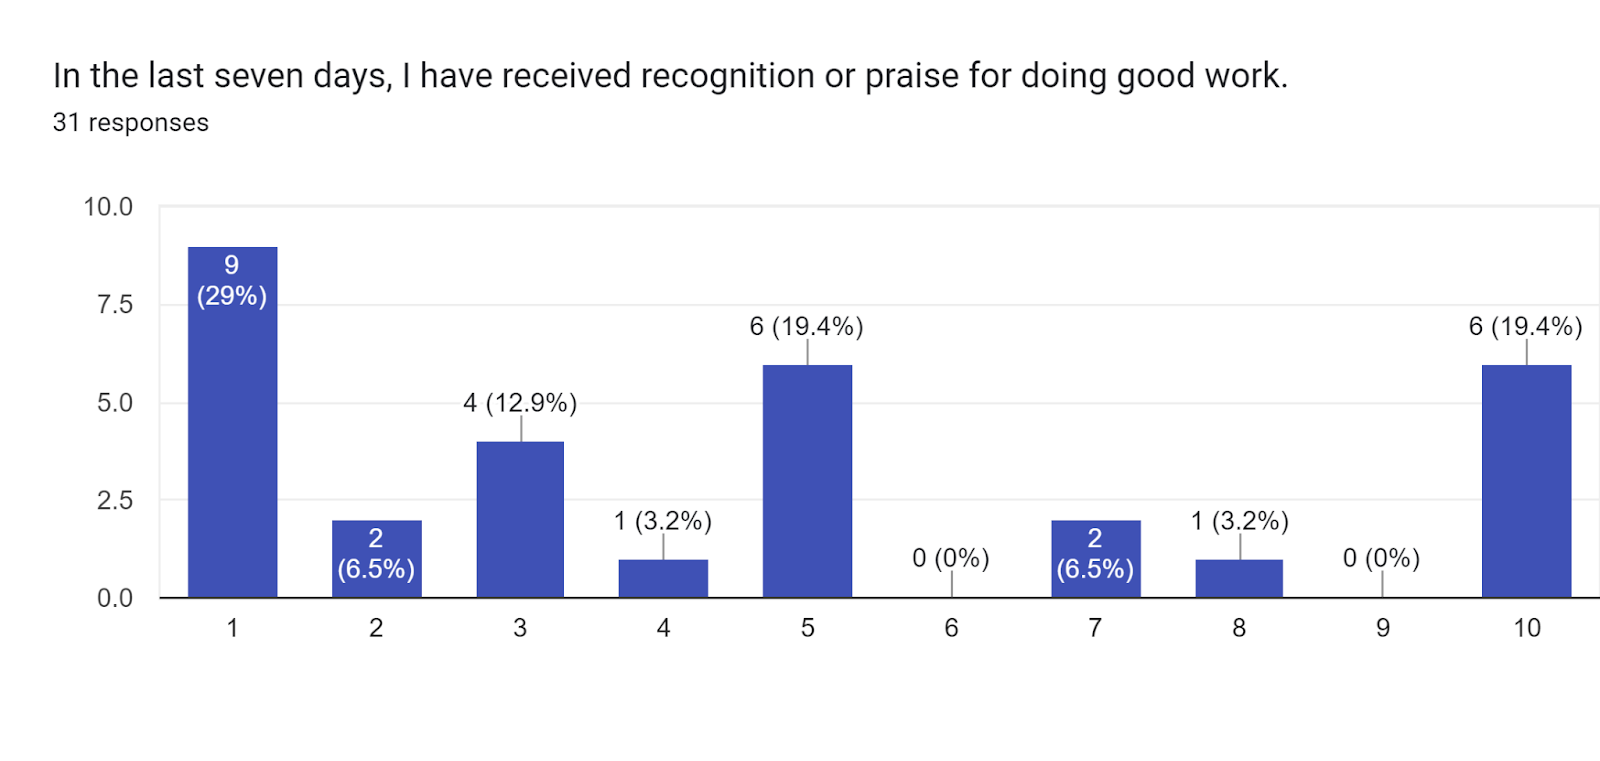 Forms response chart. Question title: In the last seven days, I have received recognition or praise for doing good work.. Number of responses: 31 responses.